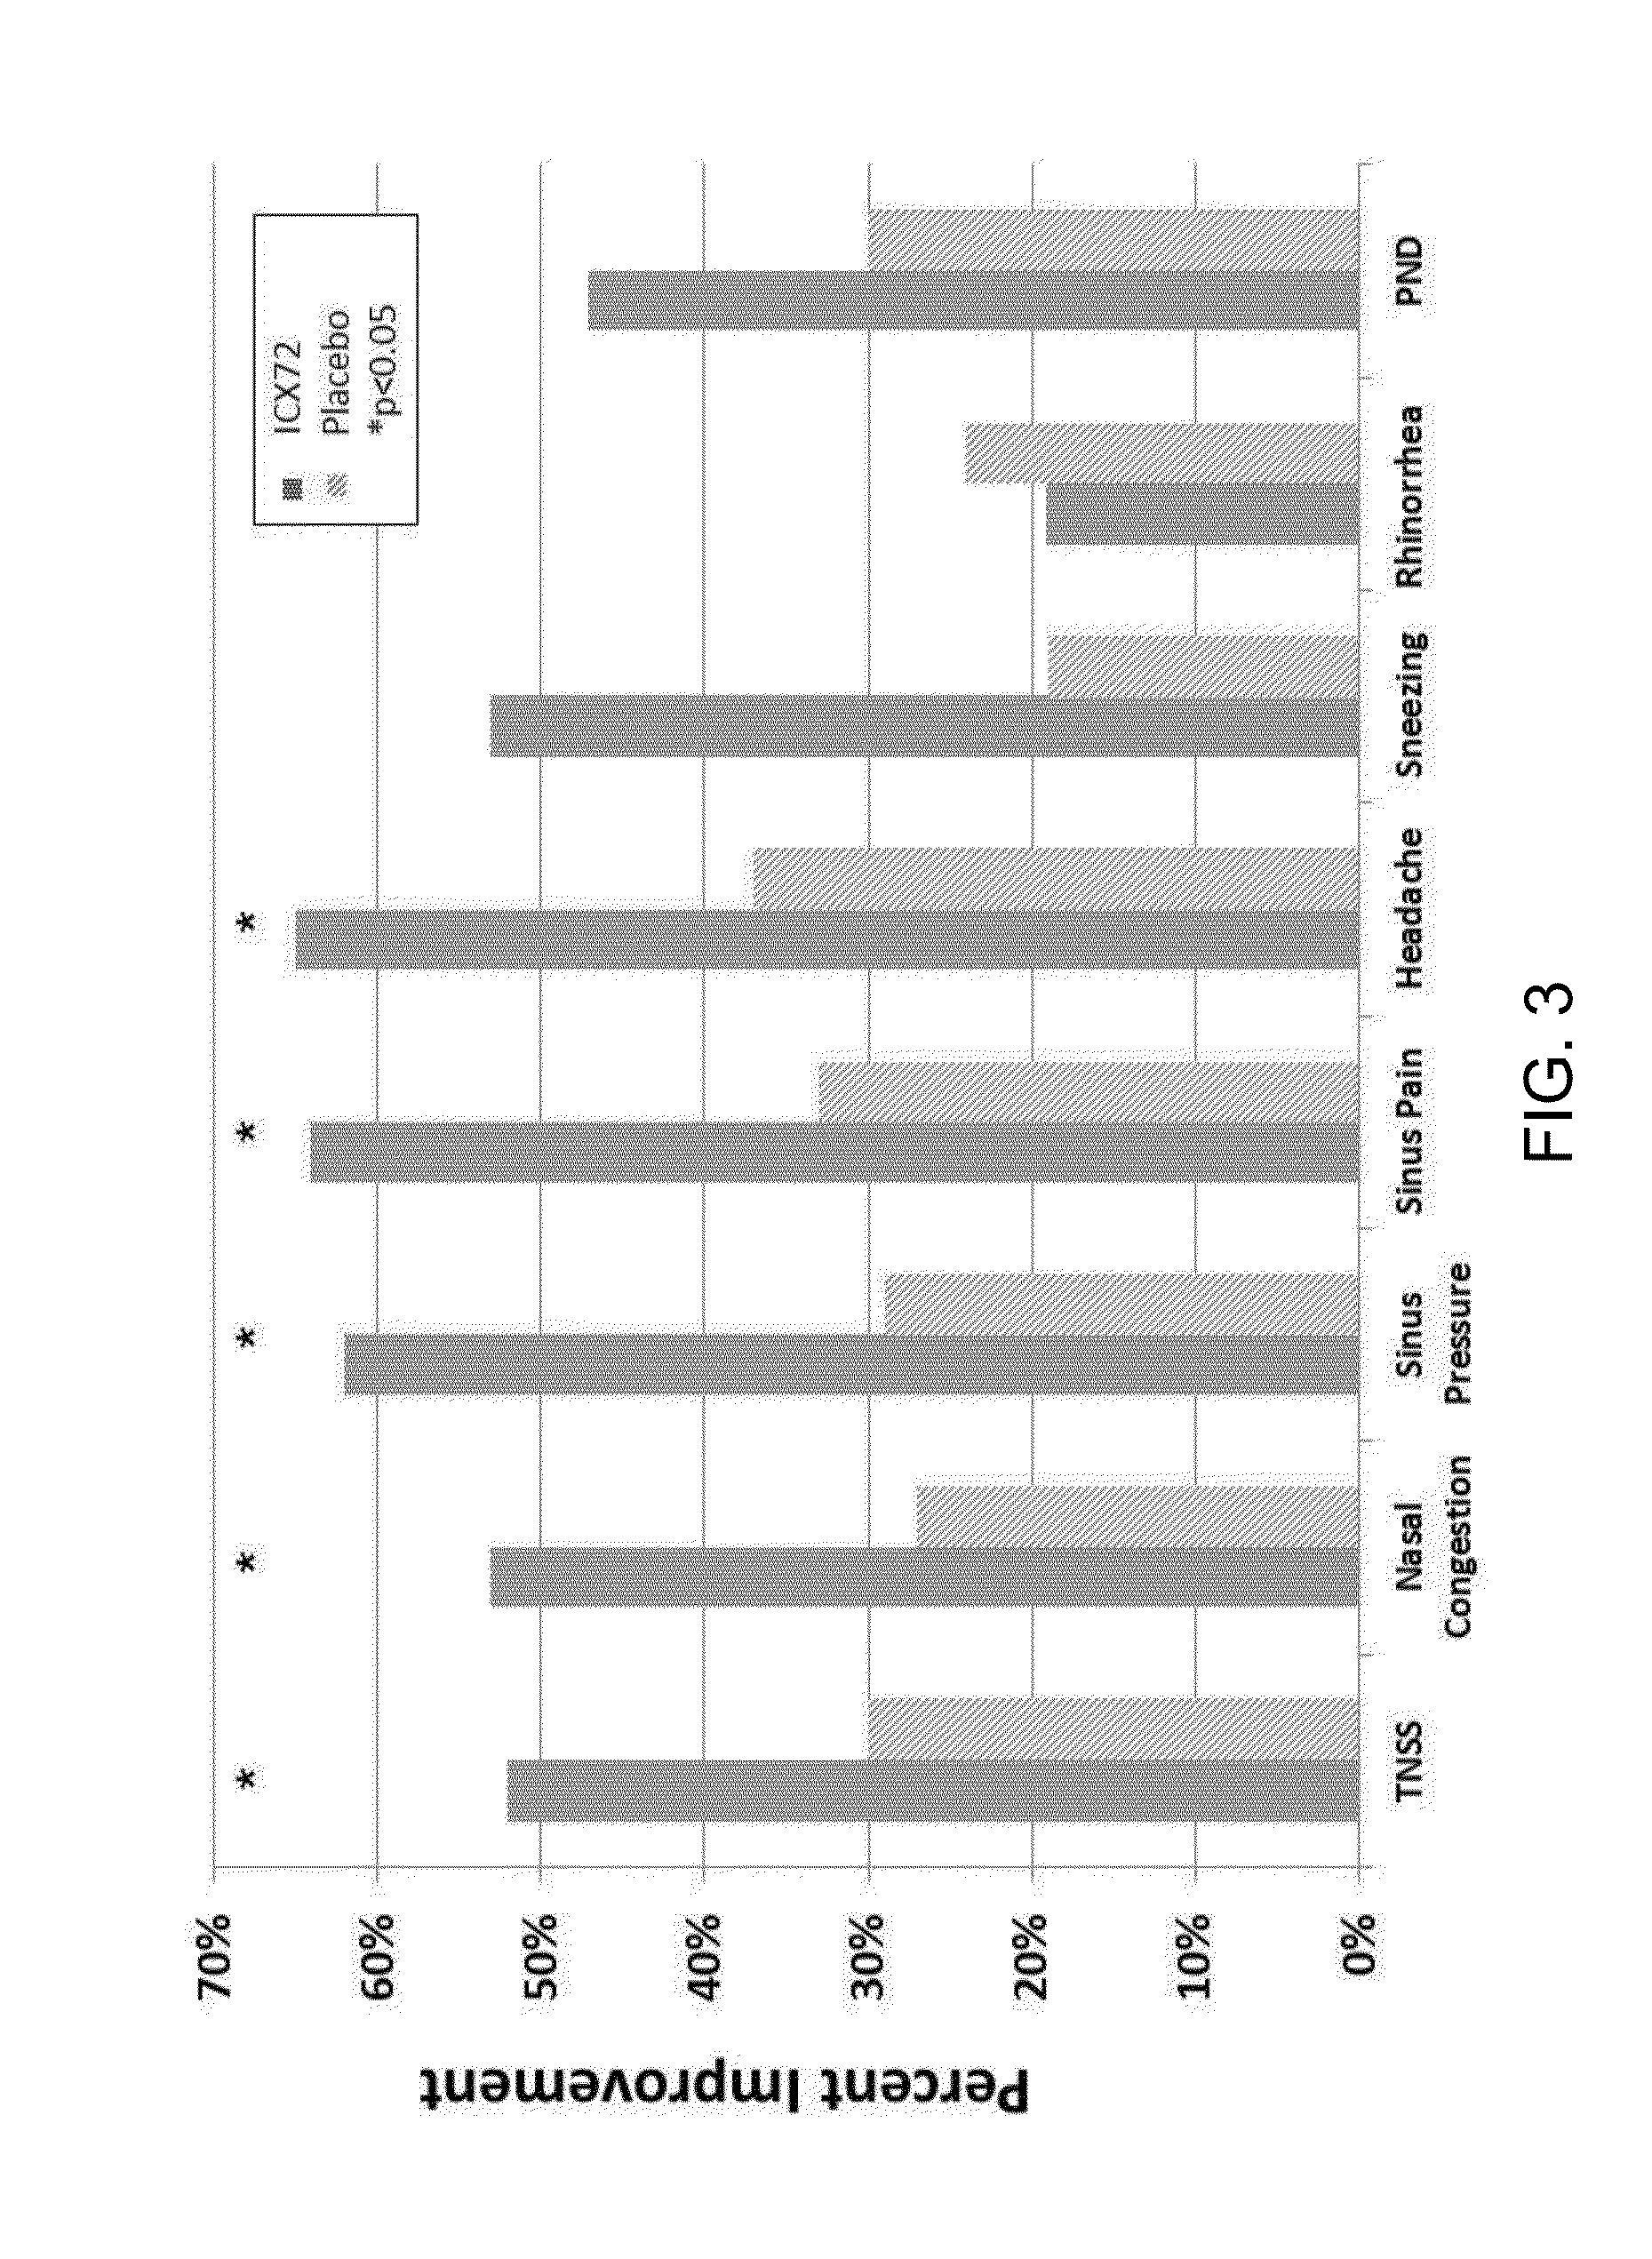 Therapeutic agent for intranasal administration and method of making and using same